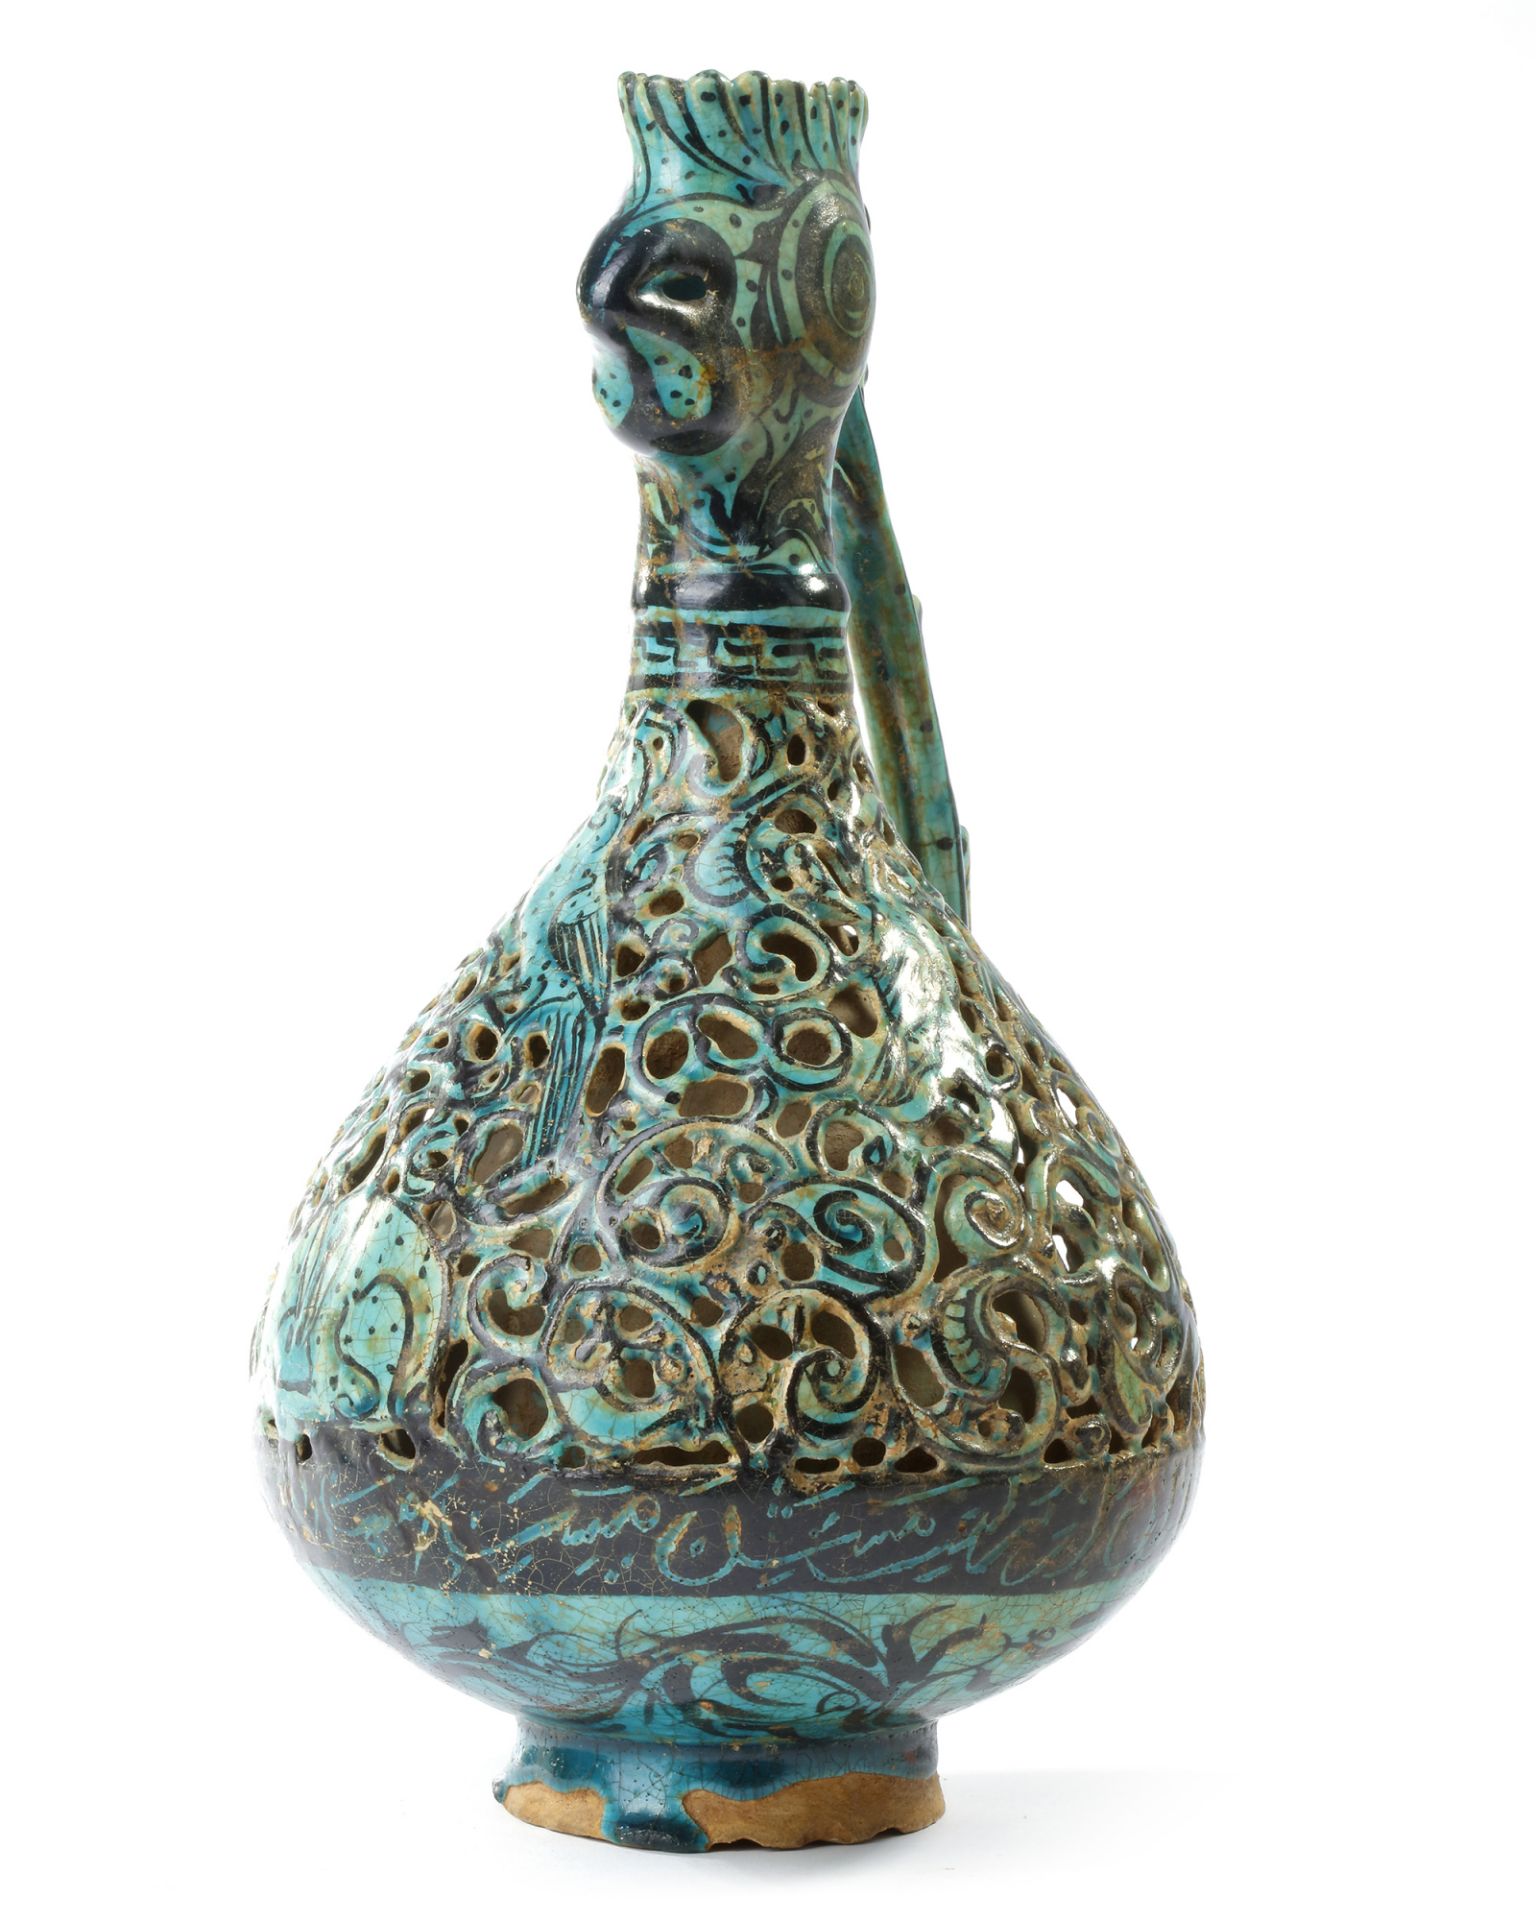 A RARE FRITWARE OPENWORK DECORATED RETICULATED EWER WITH ROOSTER HEAD, PERSIA, 13TH CENTURY - Image 15 of 16